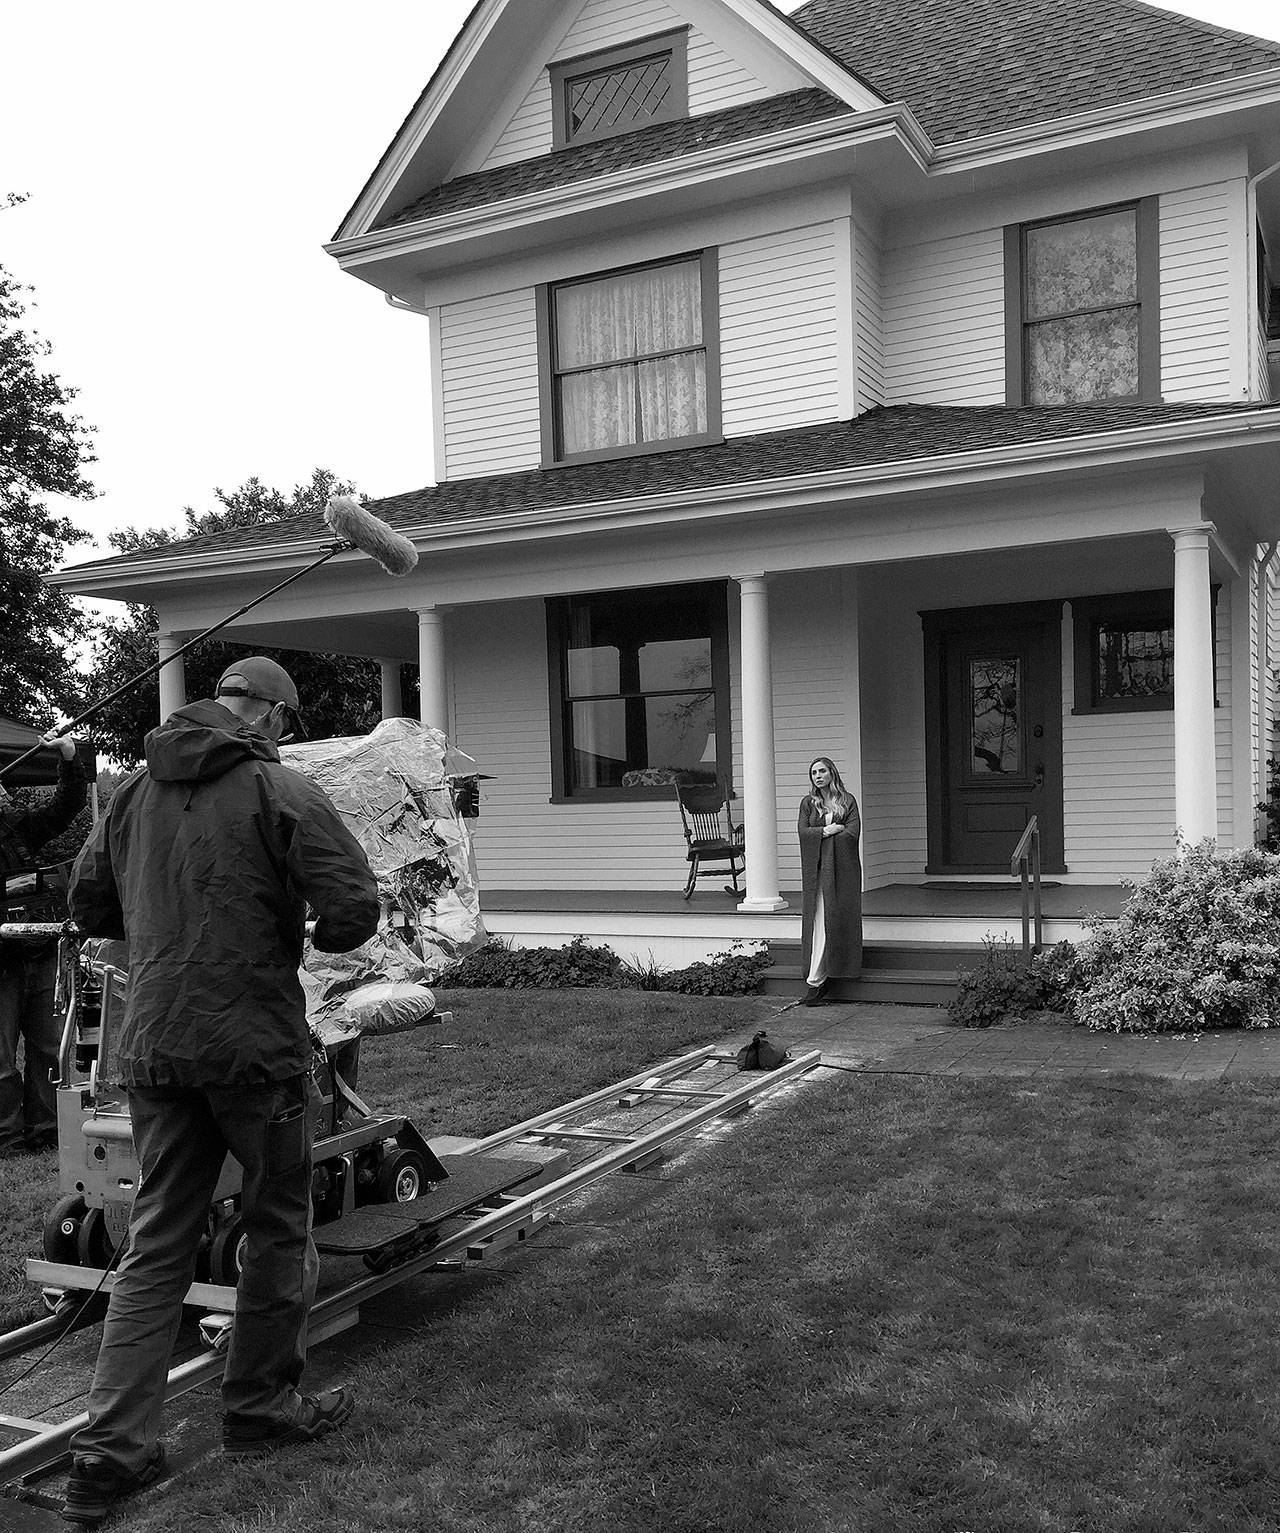 A crew shoots part of the movie “ECCO” at Jenne Farm in Coupeville. The film was written and directed by Ben Medina, who was born on Whidbey Island. The spy thriller is set to release Aug. 9. Photo provided